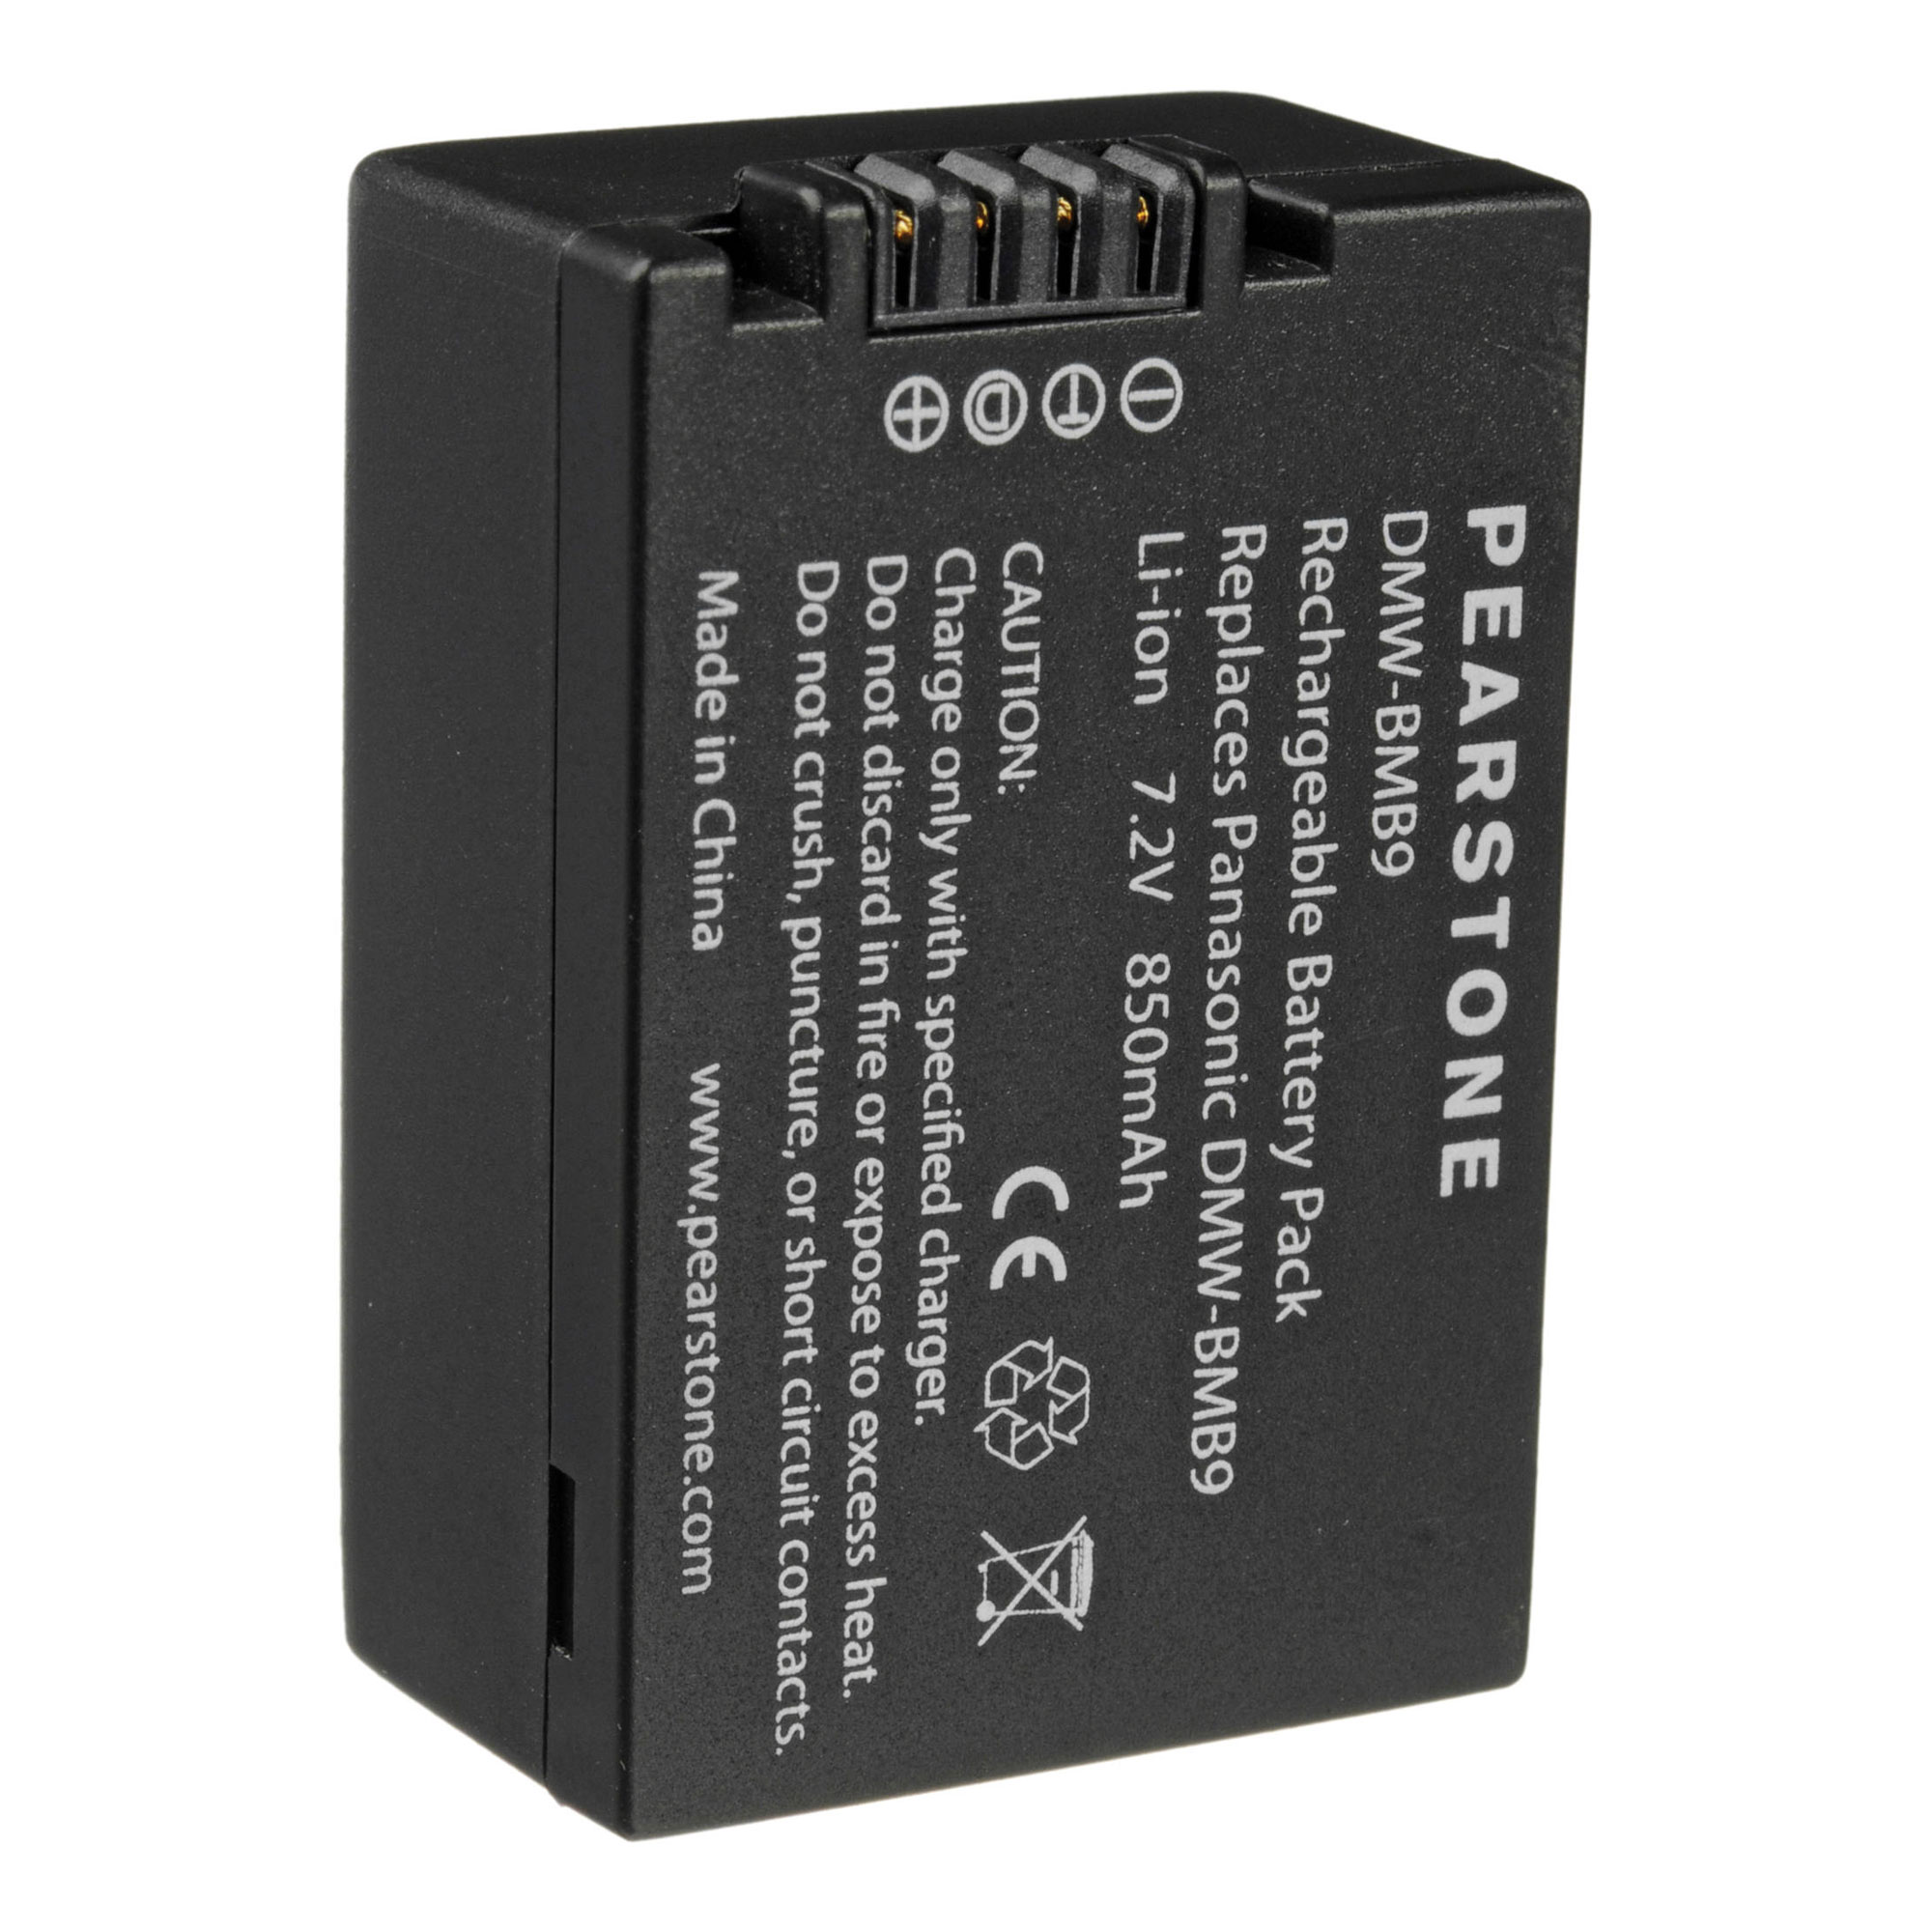 DMW-BMB9 Rechargeable Lithium-Ion Battery for Select Panasonic Cameras and Camcorders